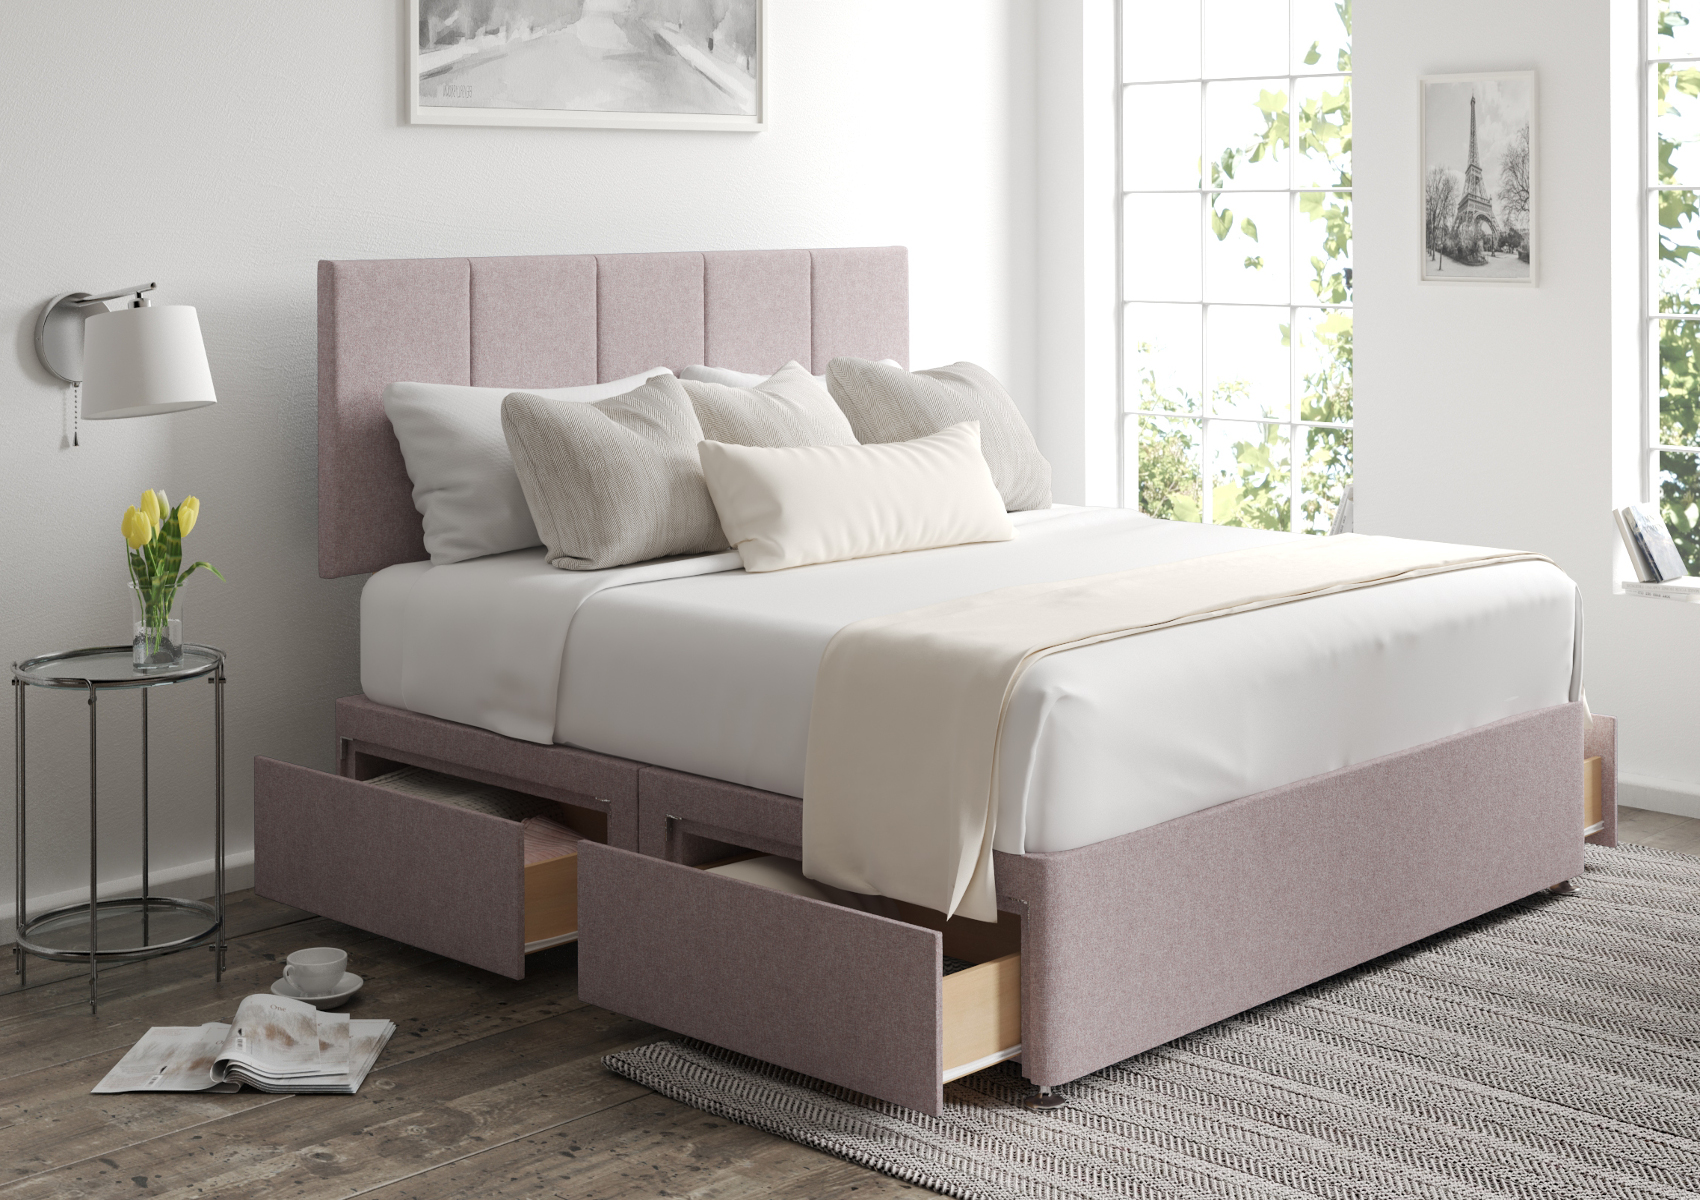 View Hannah Arran Natural Upholstered Compact Double Bed Time4Sleep information